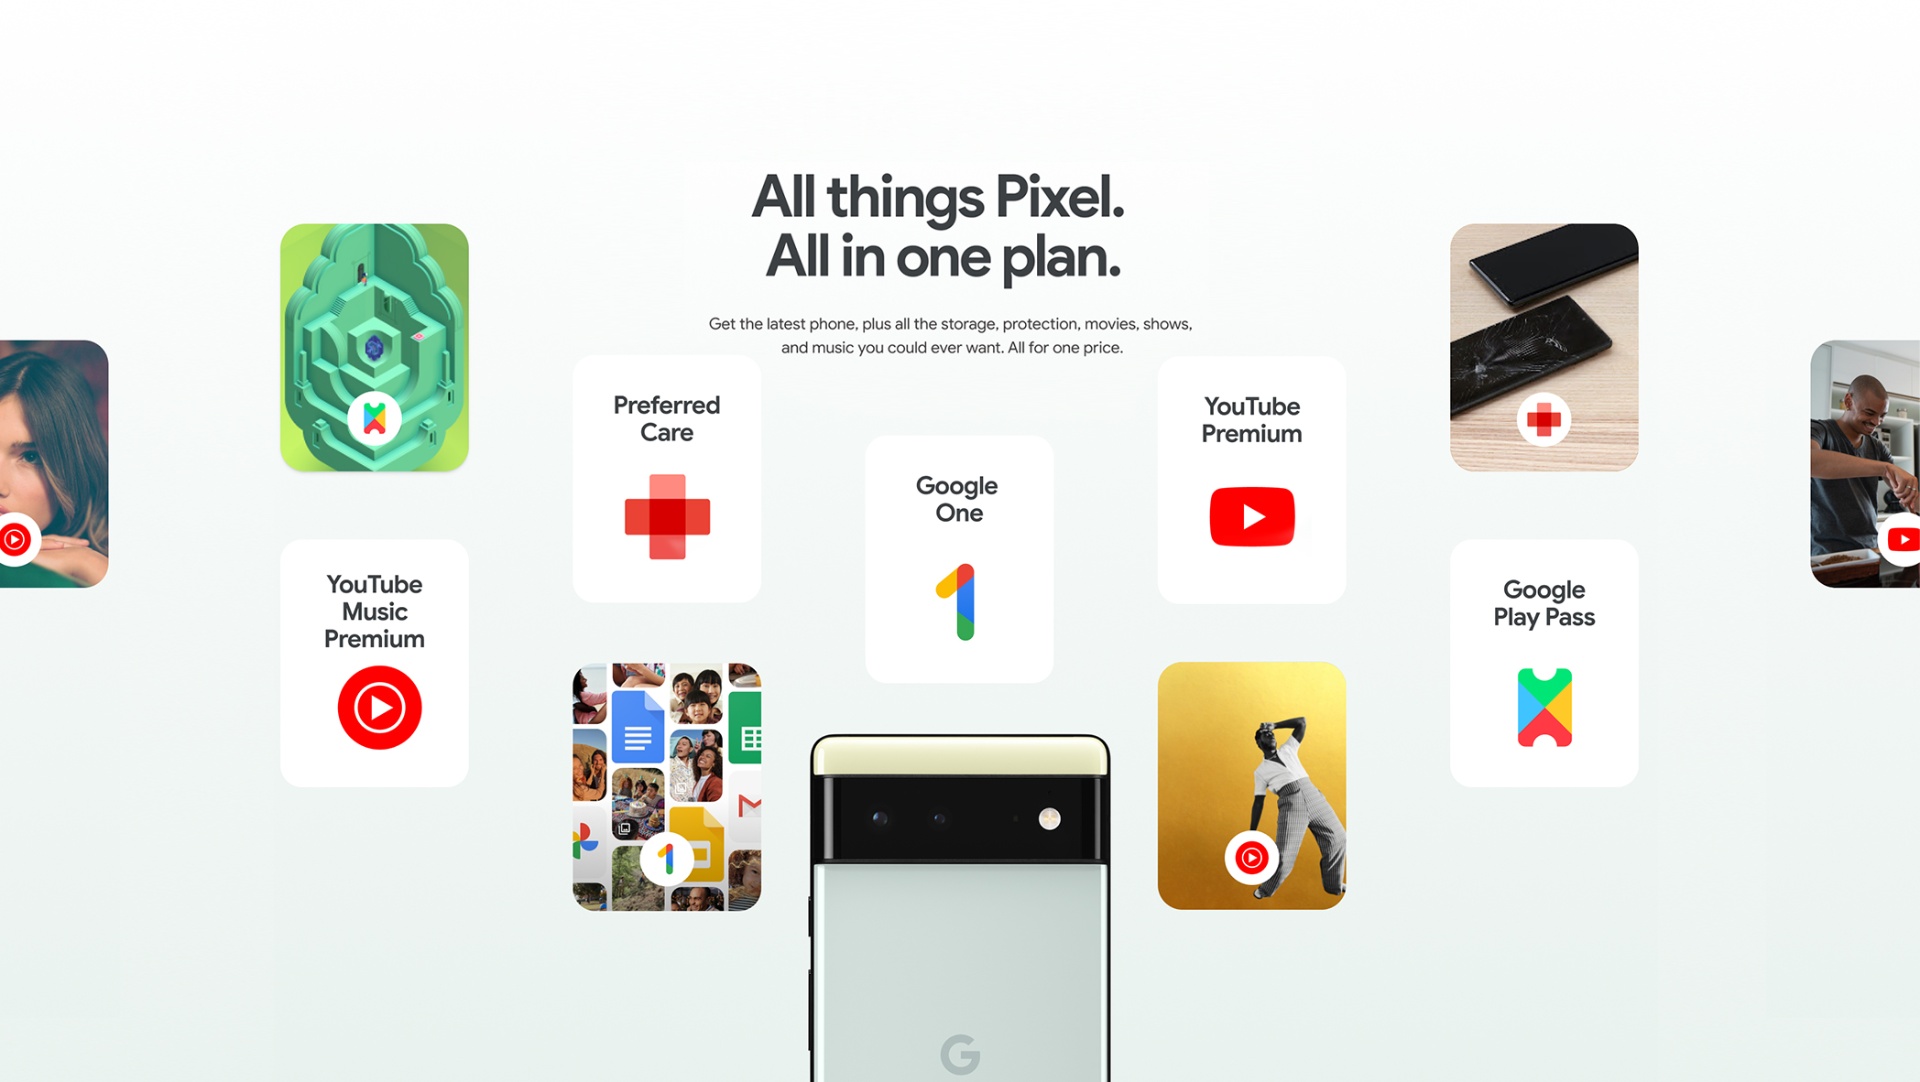 Pixel Pass - Learn More About this Service